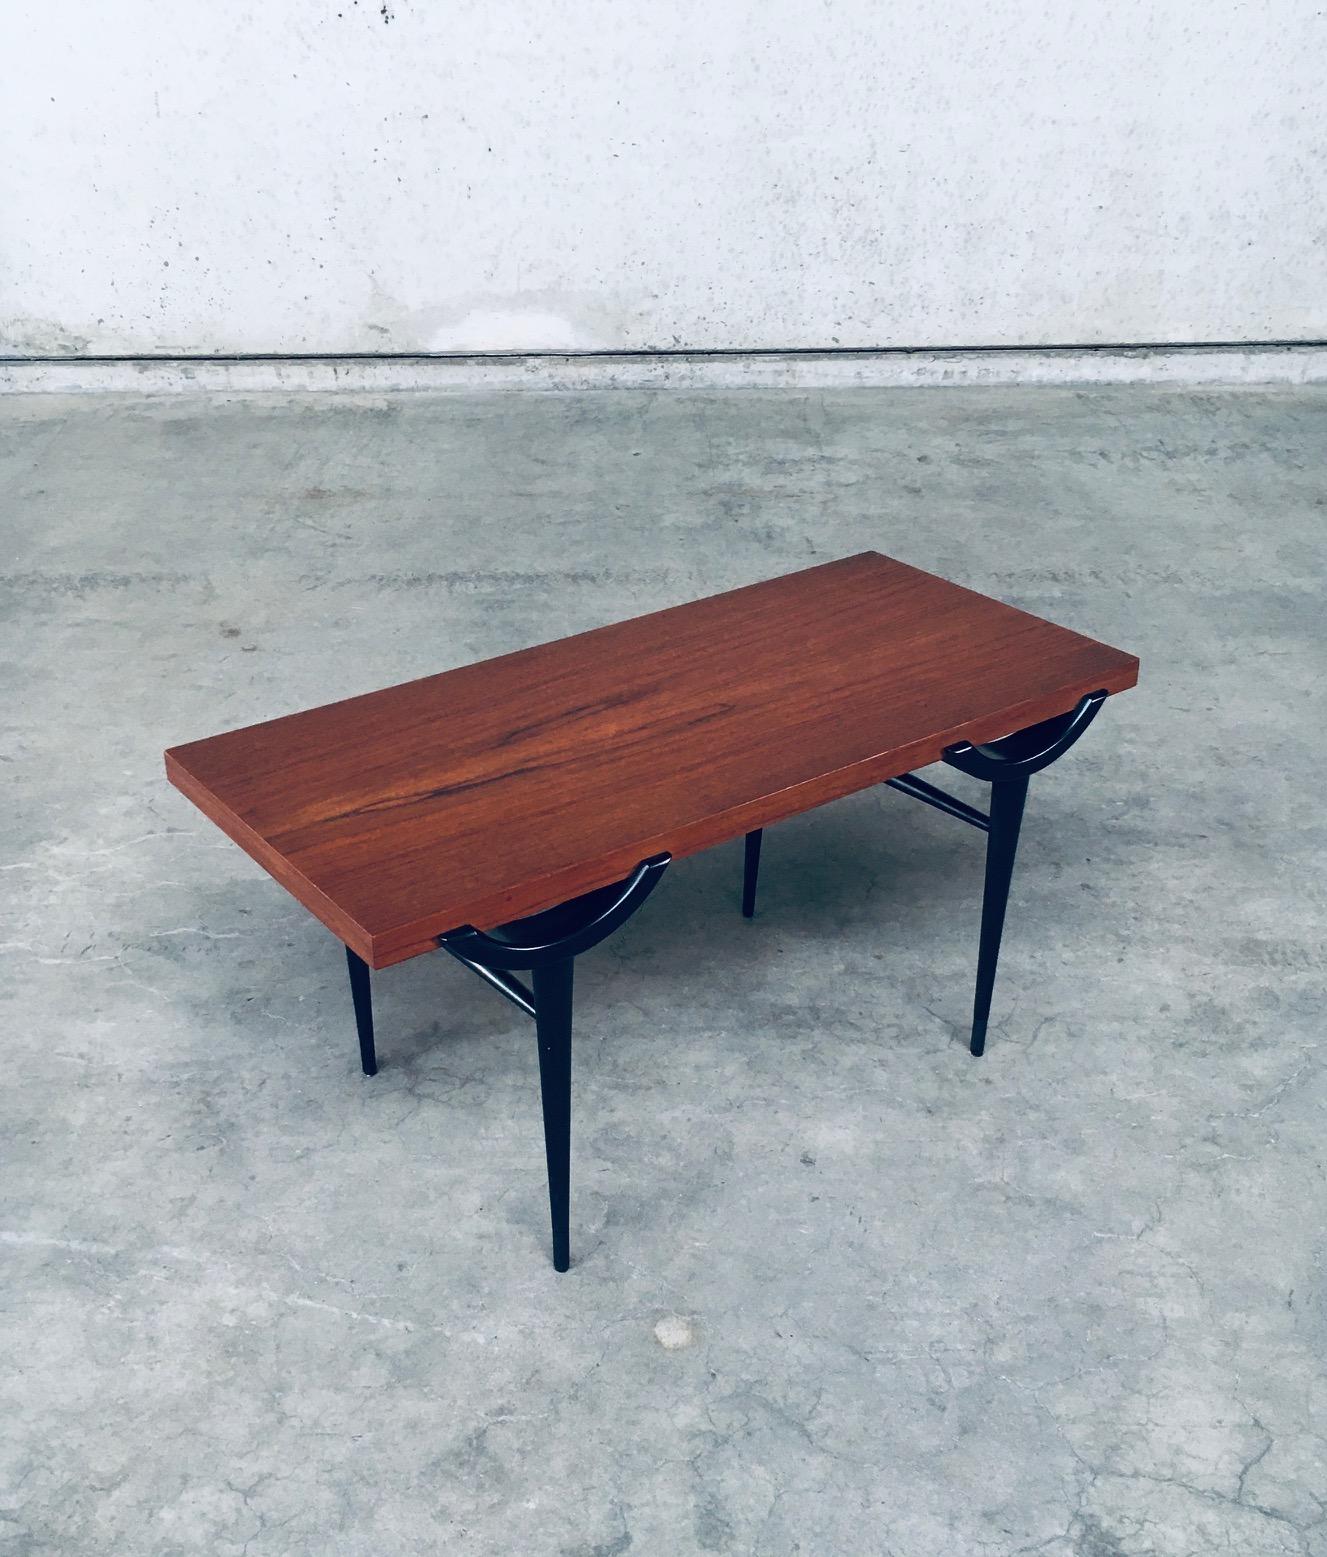 Vintage Midcentury Modern Scandinavian Design Side Table in the manner of Johannes Andersen. Made in Denmark, 1960's period. Teak rectangular top with black lacquered legs. This comes in very good condition. Measures 49,5cm x 100cm x 47cm.